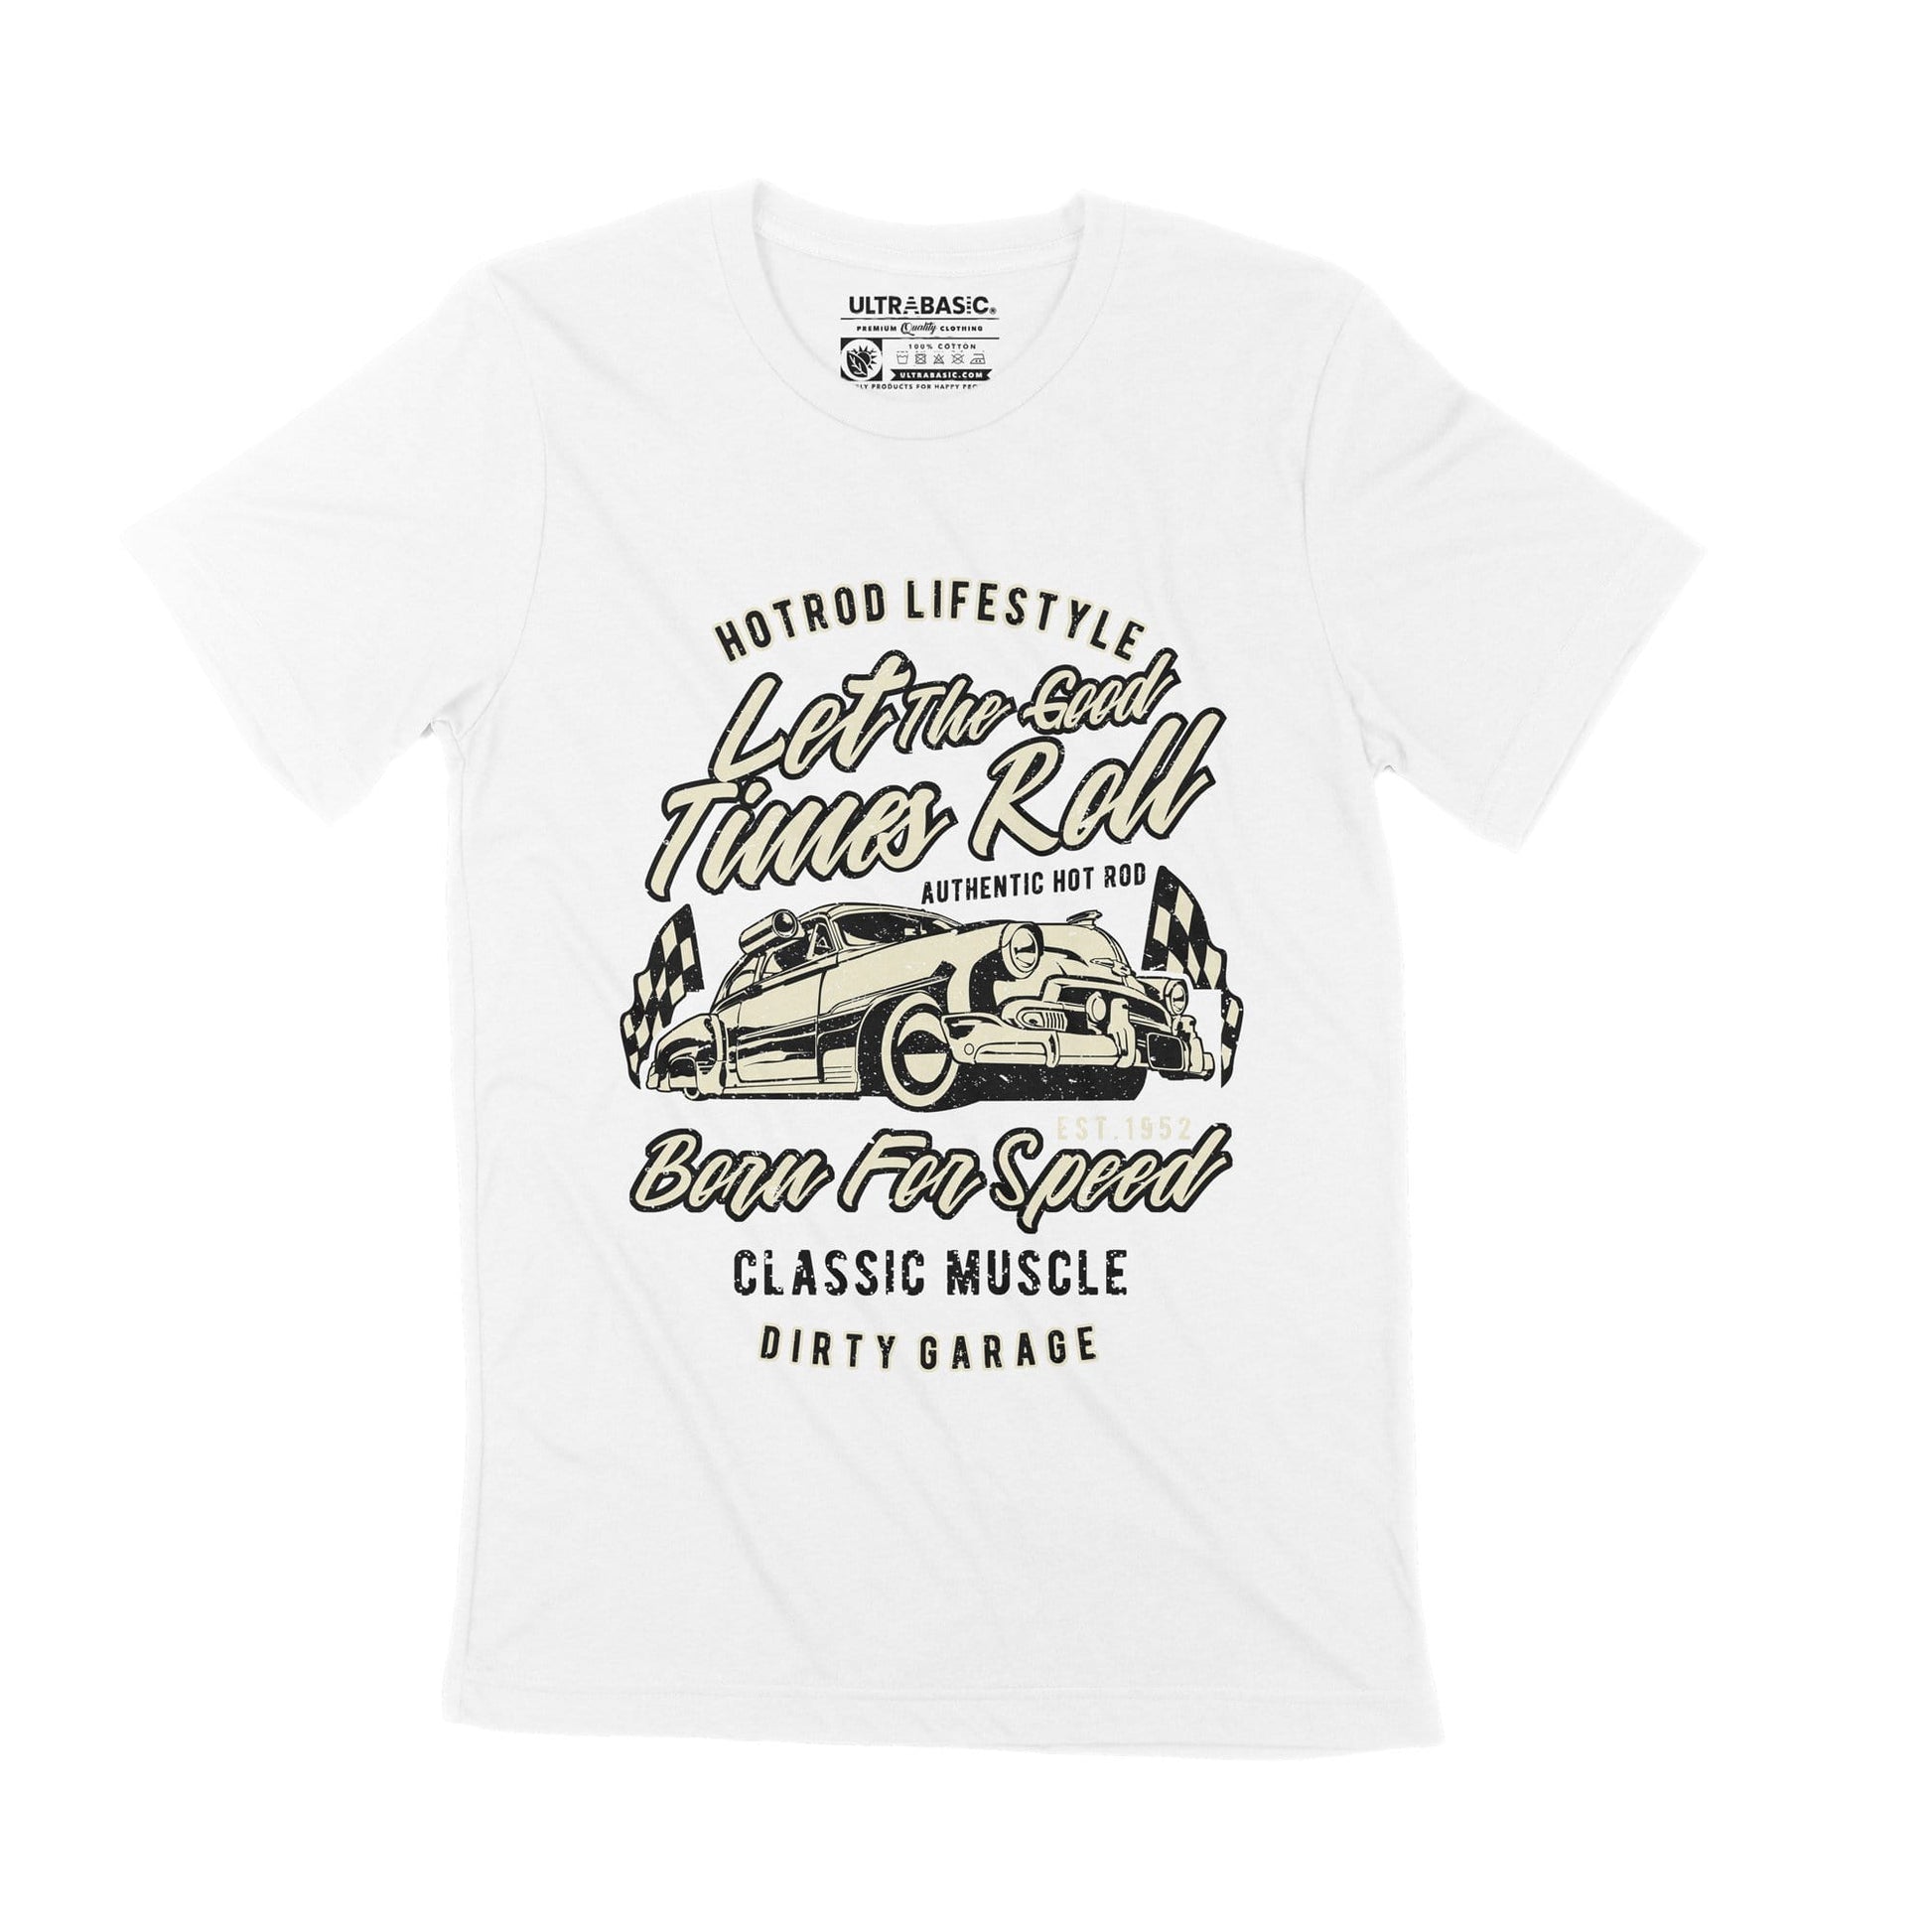 ULTRABASIC Men's T-Shirt Authentic Hot Rod - Dirty Garage Vintage Car Graphic race driver hotrod movie team rat rod john force racing clothes apparel lucky 13 rowdy shop national mechanics guy speed association drag racers gas old guys rule motorhead rock apparel unisex tees outfit genuine youth merchandise clothing christmas